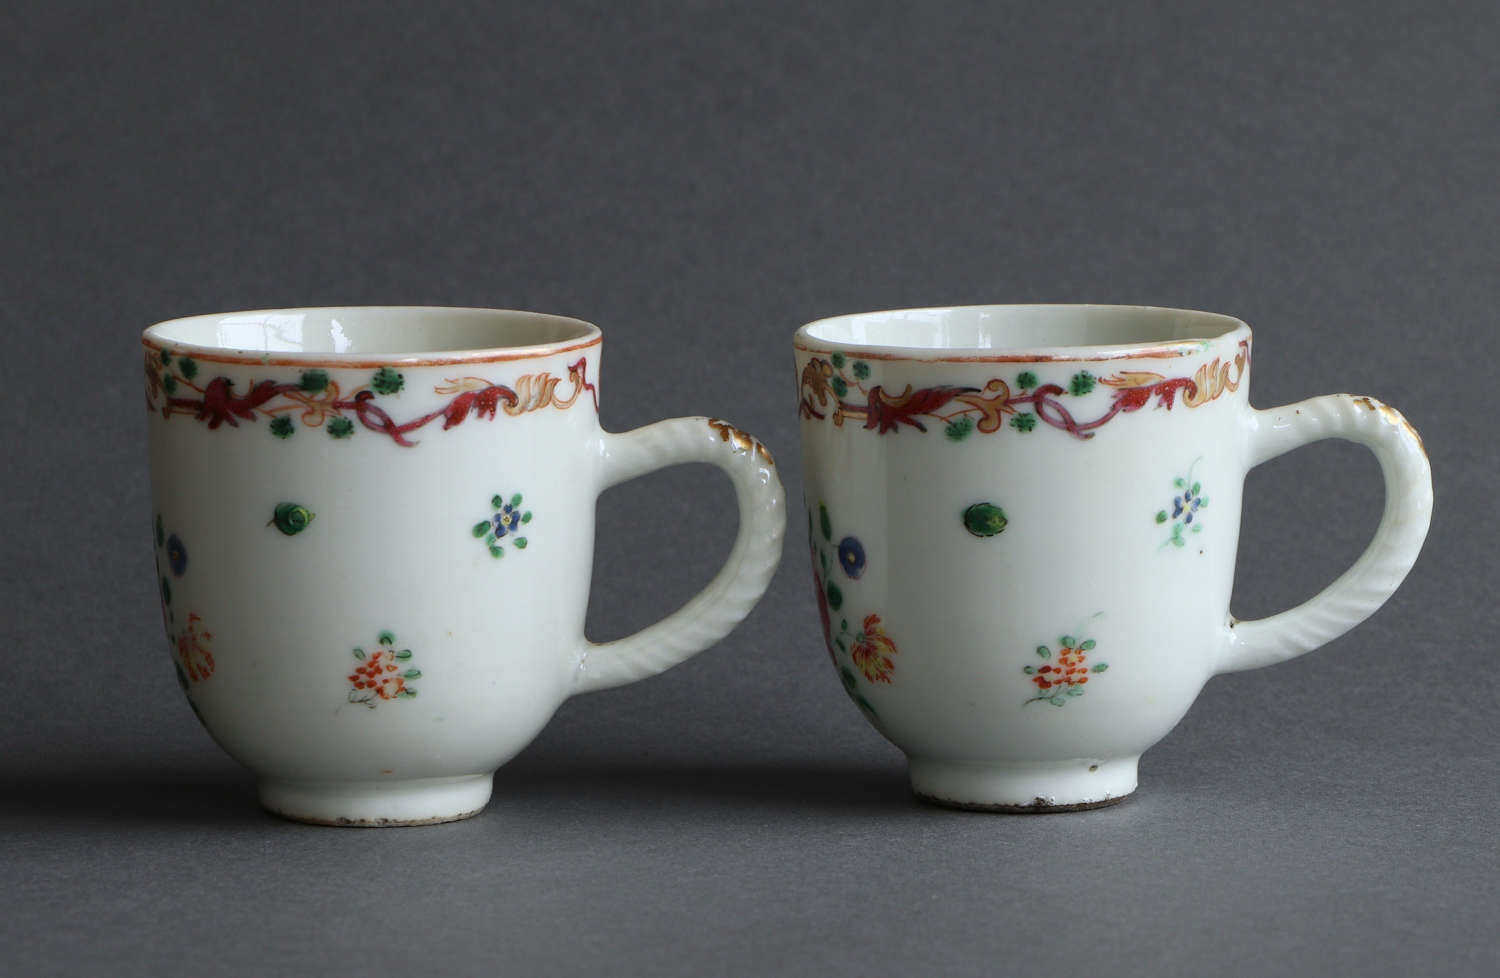 A pair of Chinese famille rose coffee cups with masonic design c1760